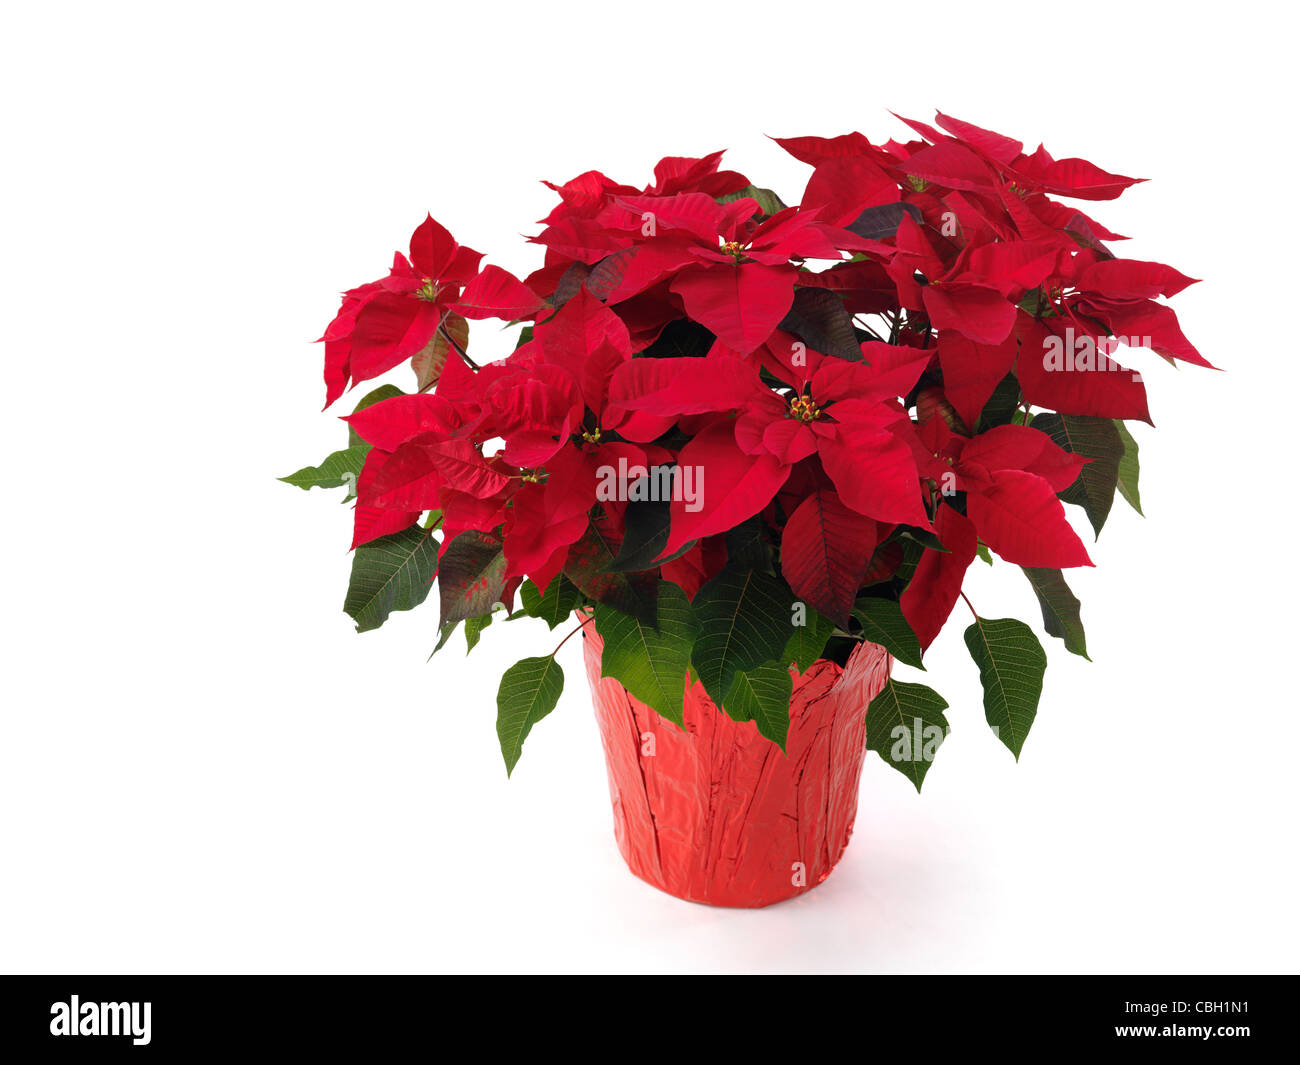 Poinsettia - red Christmas flower in a pot. Isolated on white background. Stock Photo